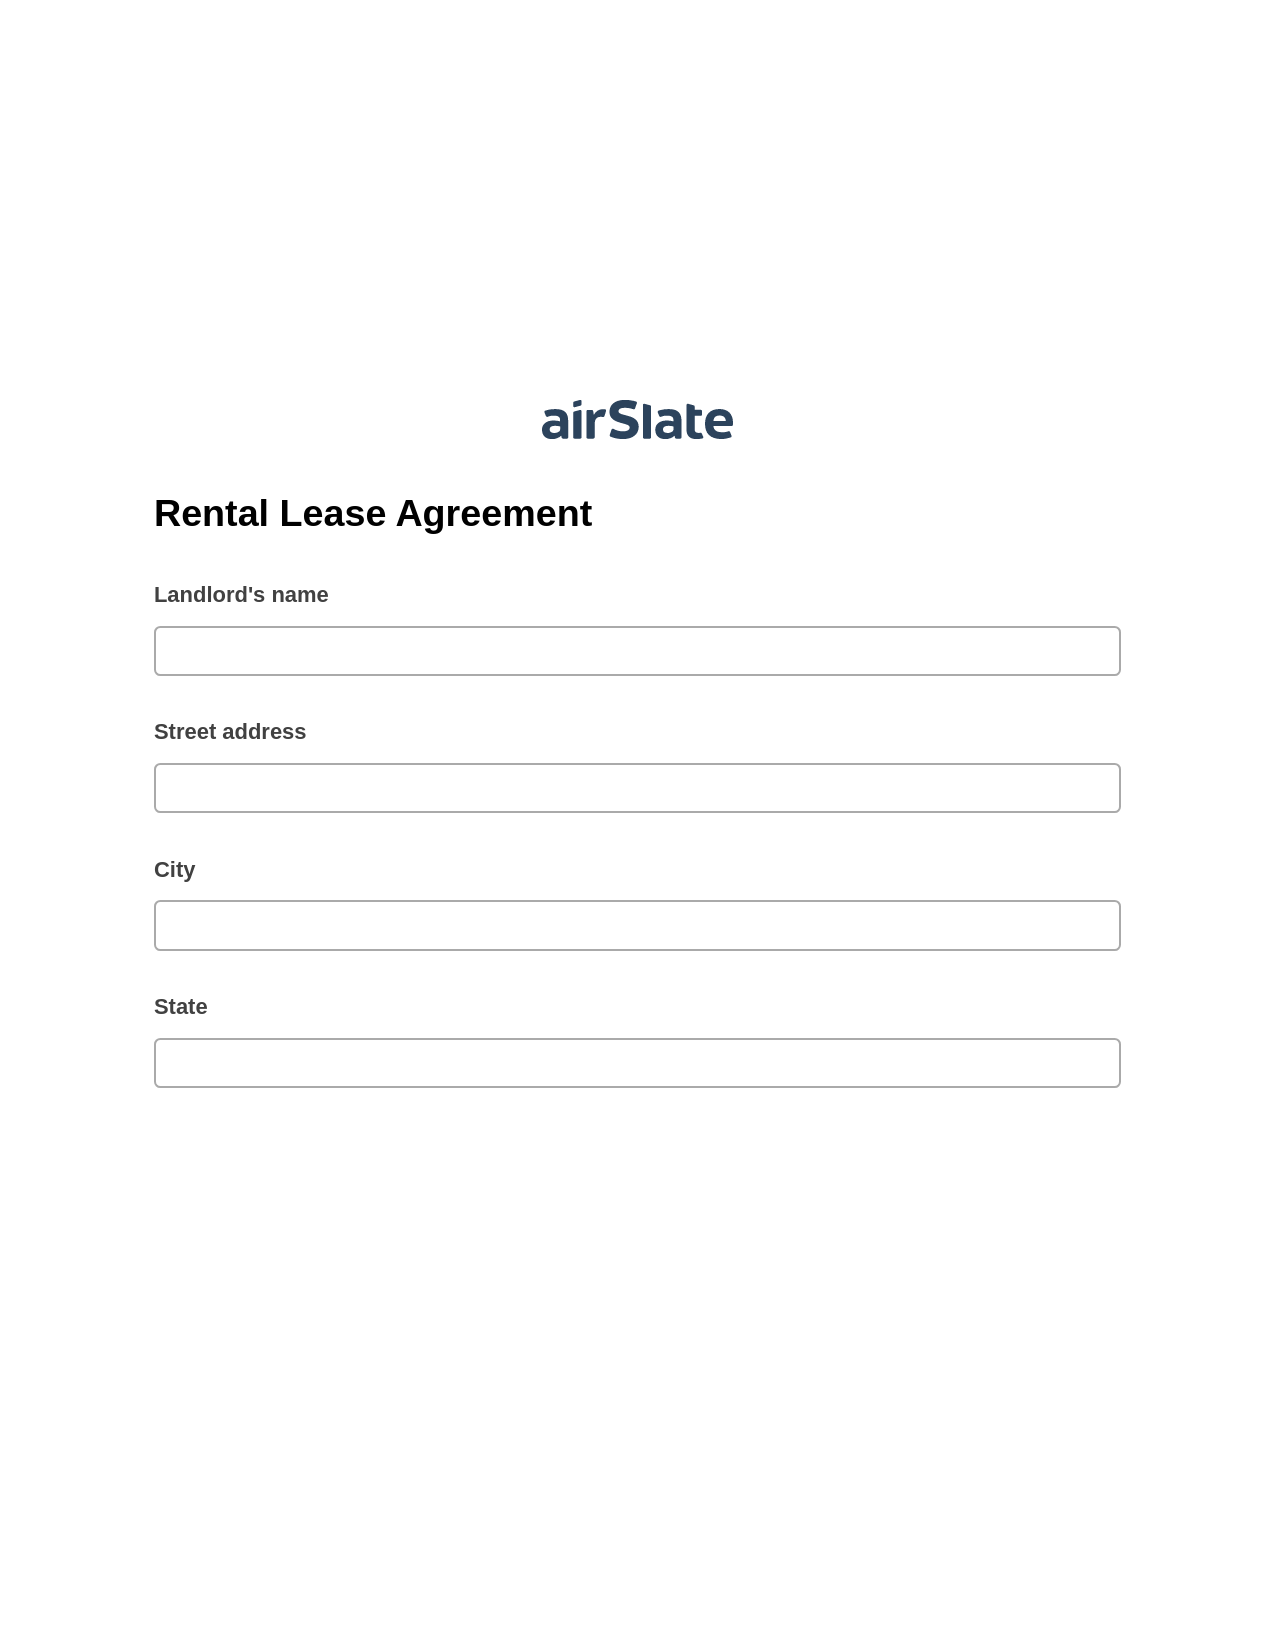 Rental Lease Agreement Pre-fill from CSV File Dropdown Options Bot, Update NetSuite Records Bot, Slack Notification Postfinish Bot